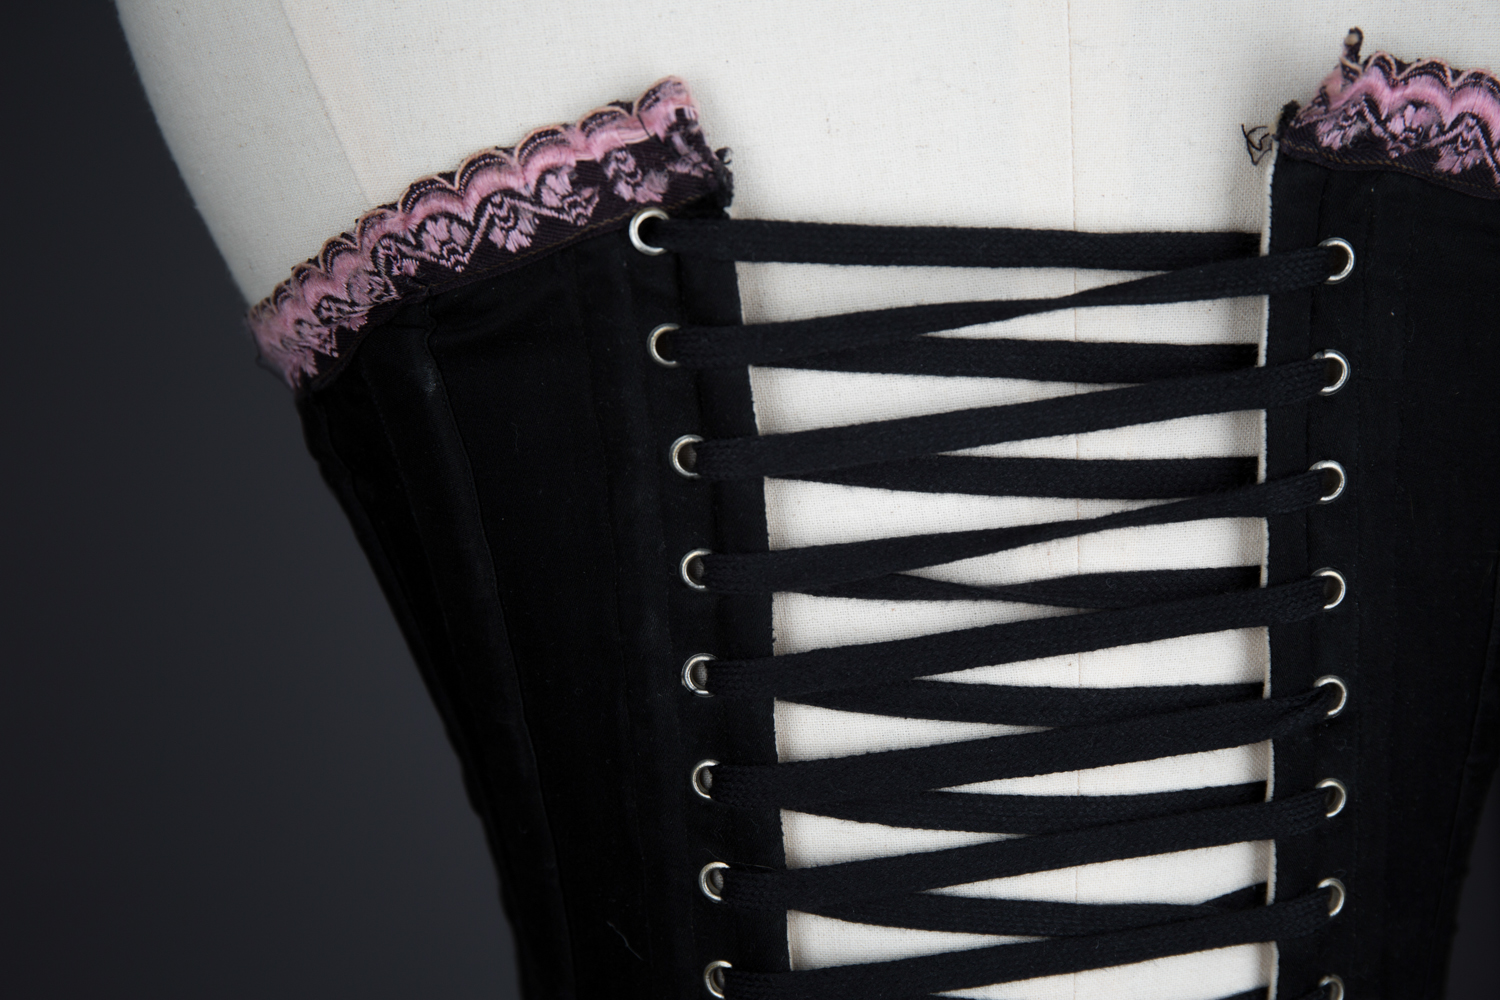 Black Cotton Corset With Spoon Busk, Pink Flossing Embroidery & Woven Trim, c. 1890-1900s, Great Britain. The Underpinnings Museum. Photography by Tigz Rice.